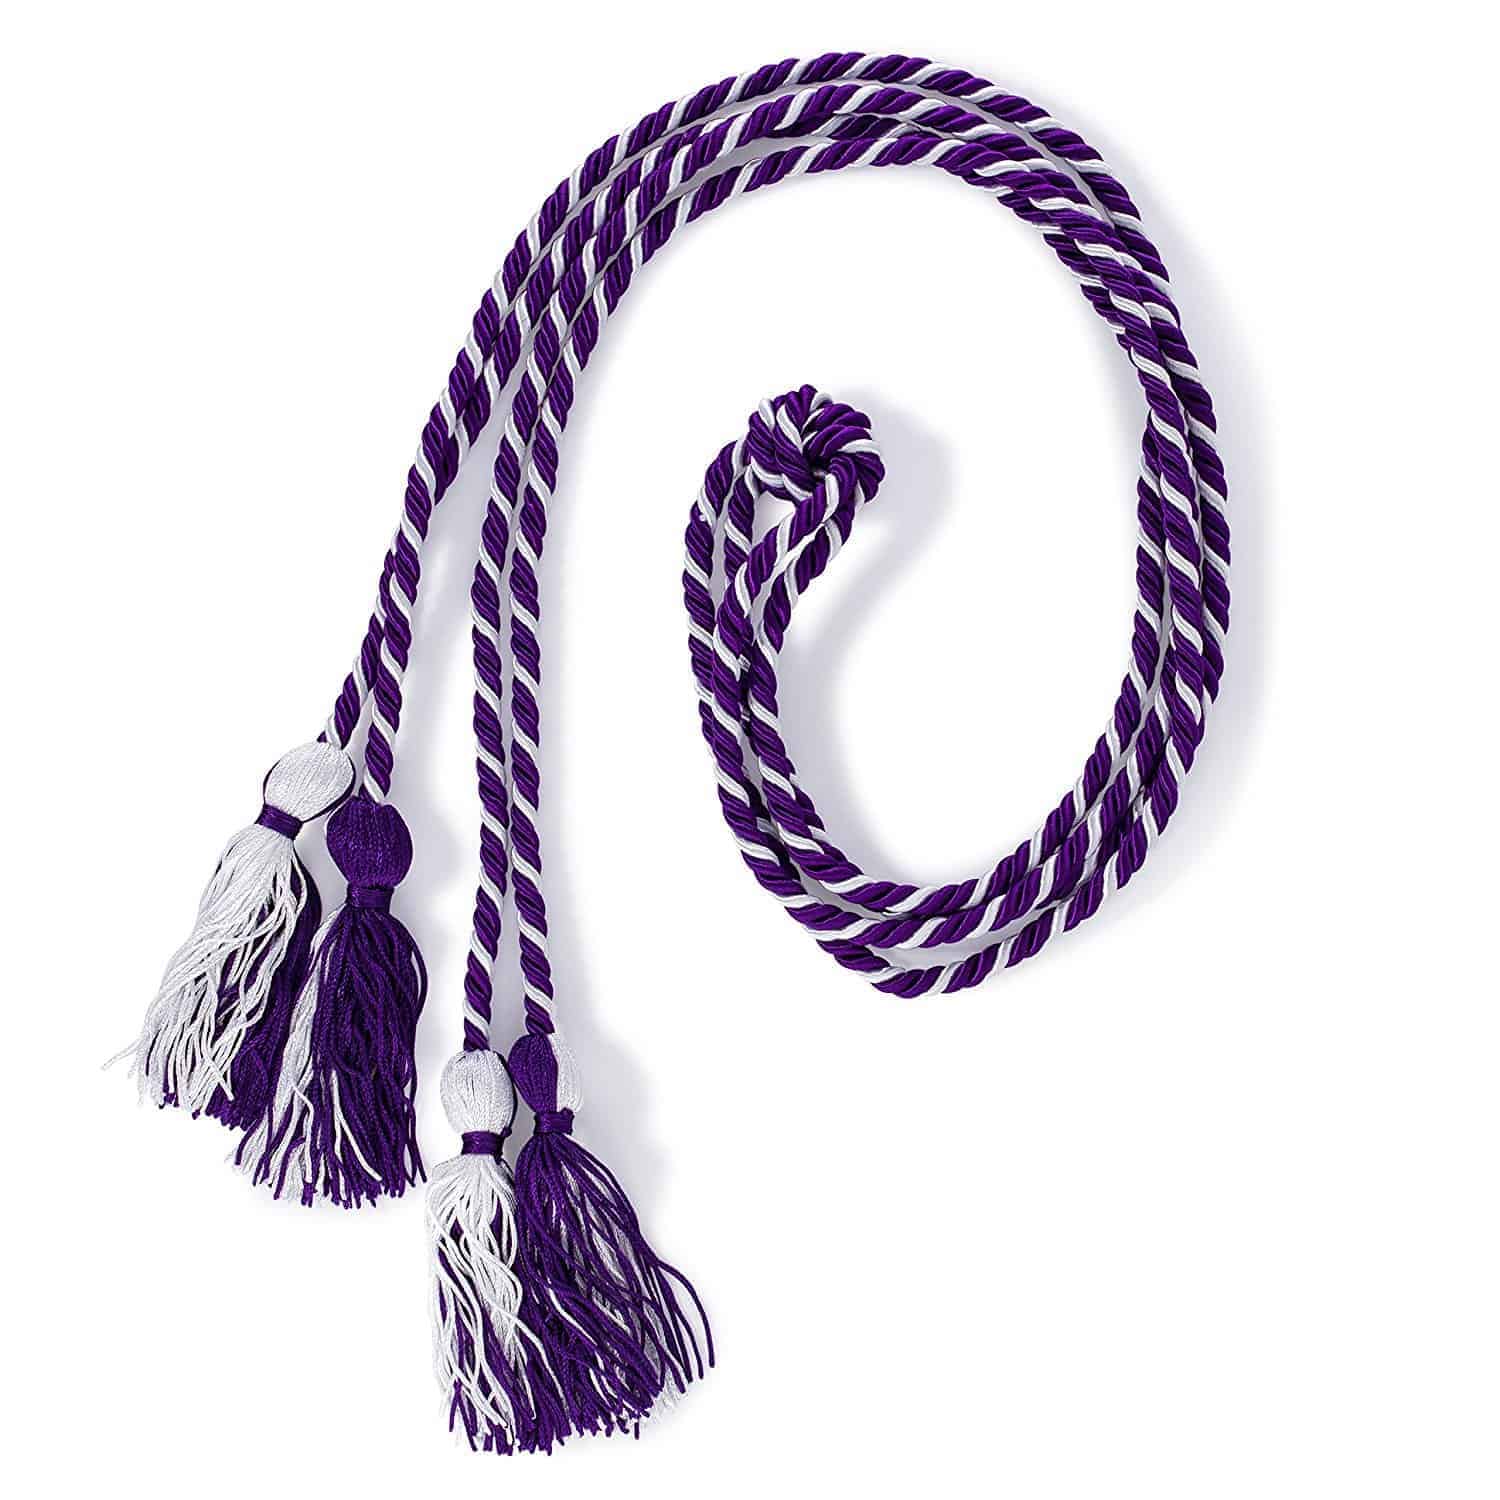 Celebrate Graduation with SWE Honor Cords! - All Together